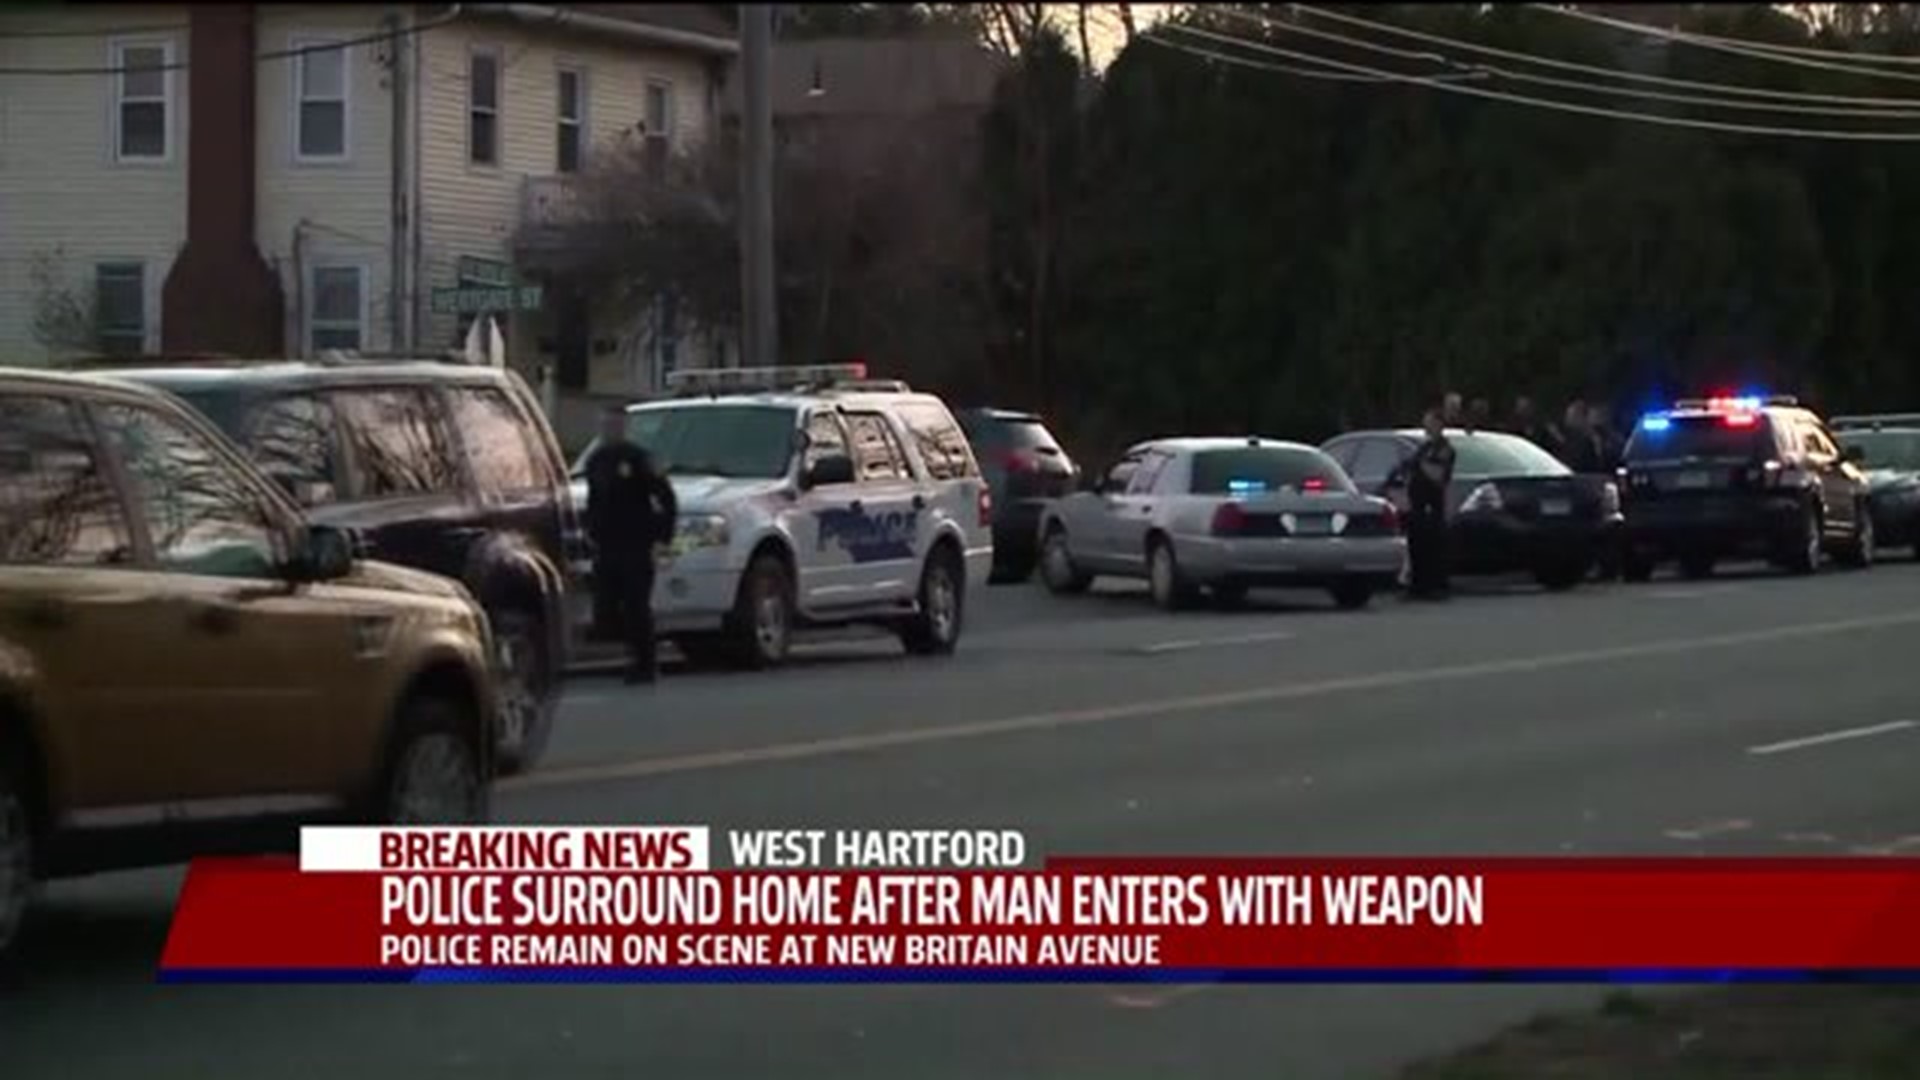 Intense situation takes over West Hartford neighborhood as police investigate